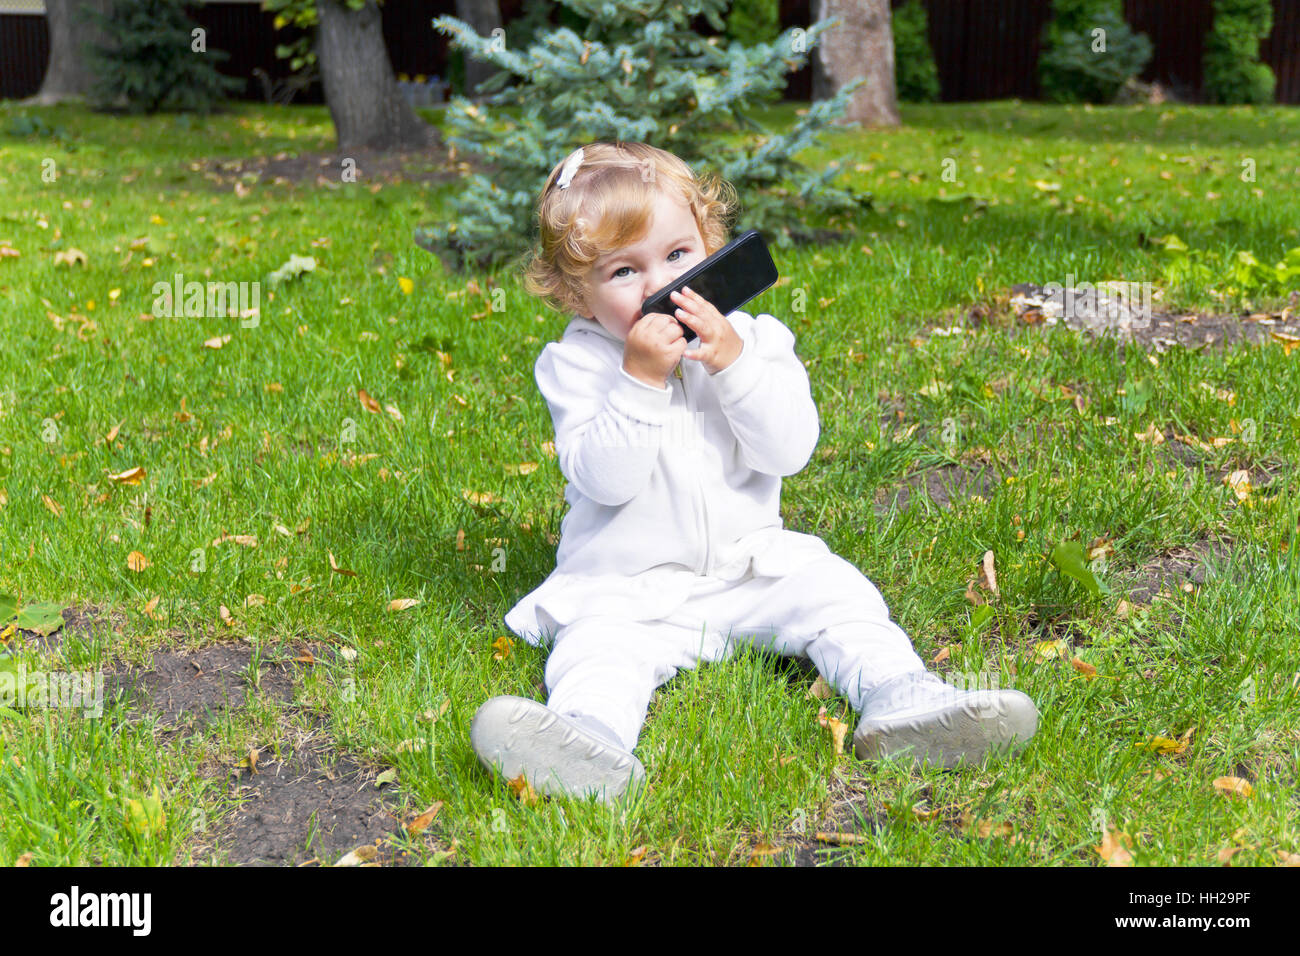 Baby Sitting On Grass Holding Green Leaves And Looking Upward Stock Photo -  Download Image Now - iStock